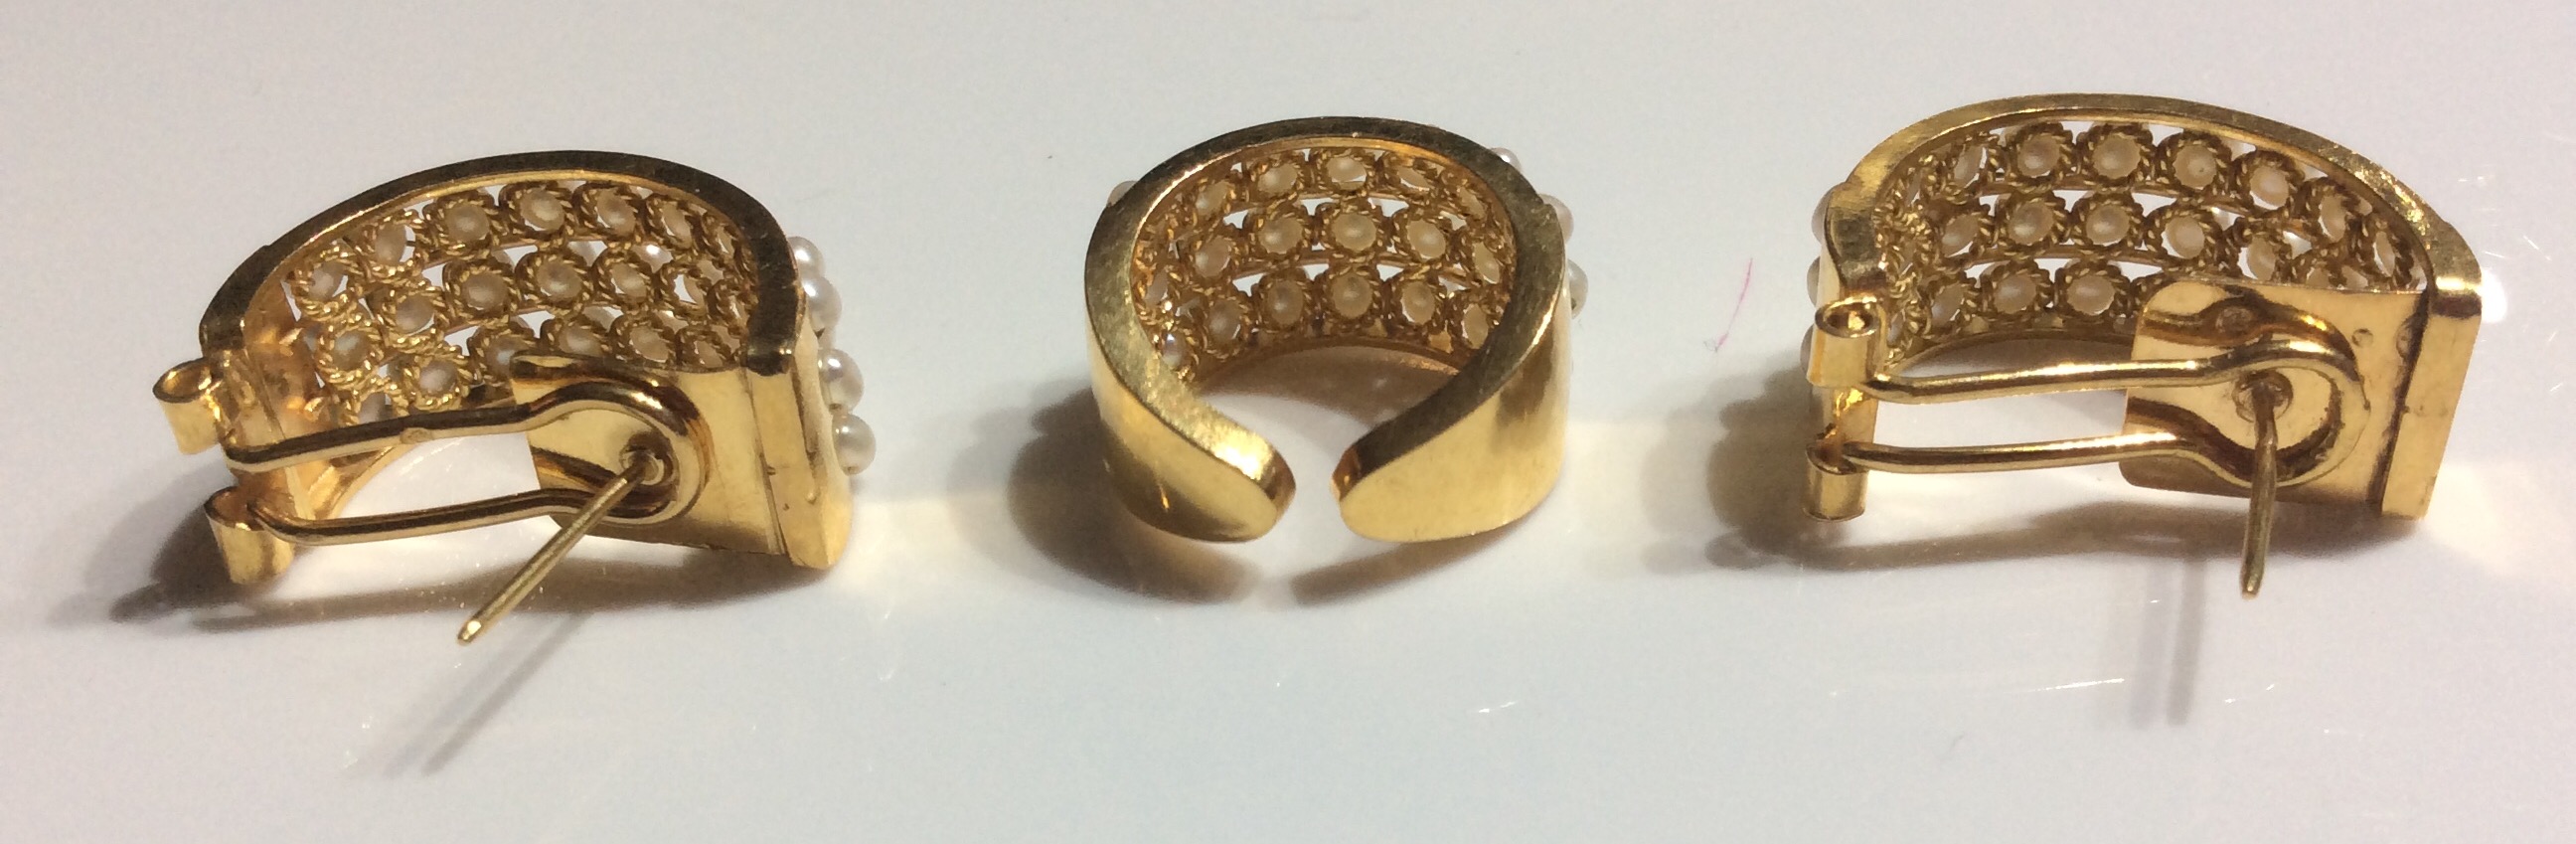 A BAHRAIN 21CT GOLD AND SEED PEARL EARRINGS AND RING SET Semi elliptical form, set with three rows - Image 2 of 2